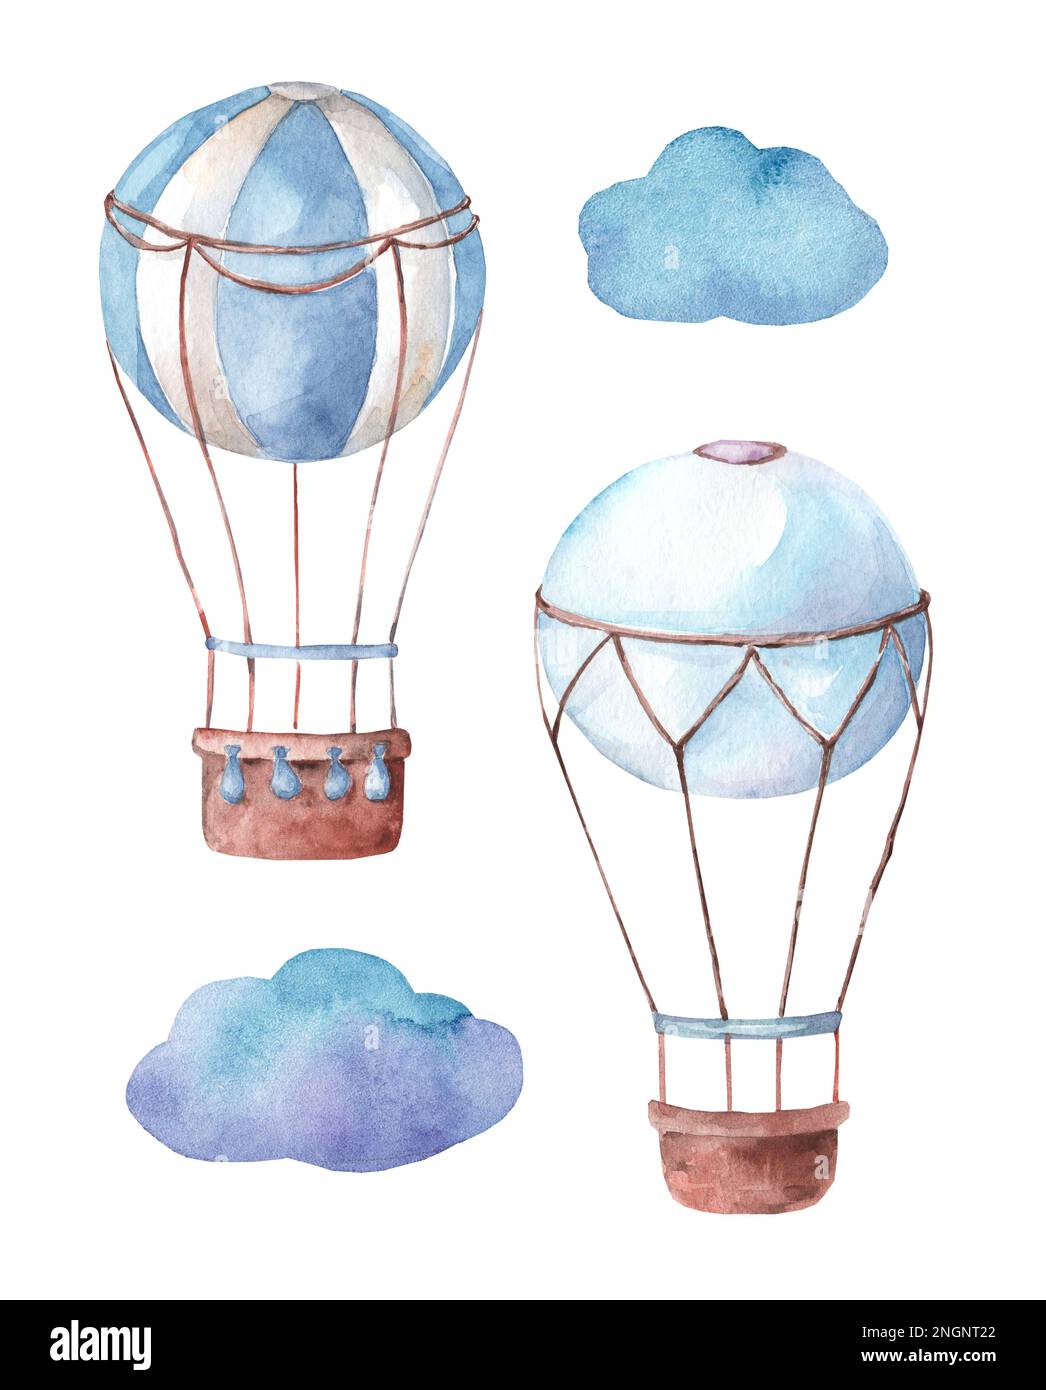 Collection of watercolor balloons. Clouds and balloons on a white background. The interior of the child's room. Vintage hand drawn illustration Stock Photo